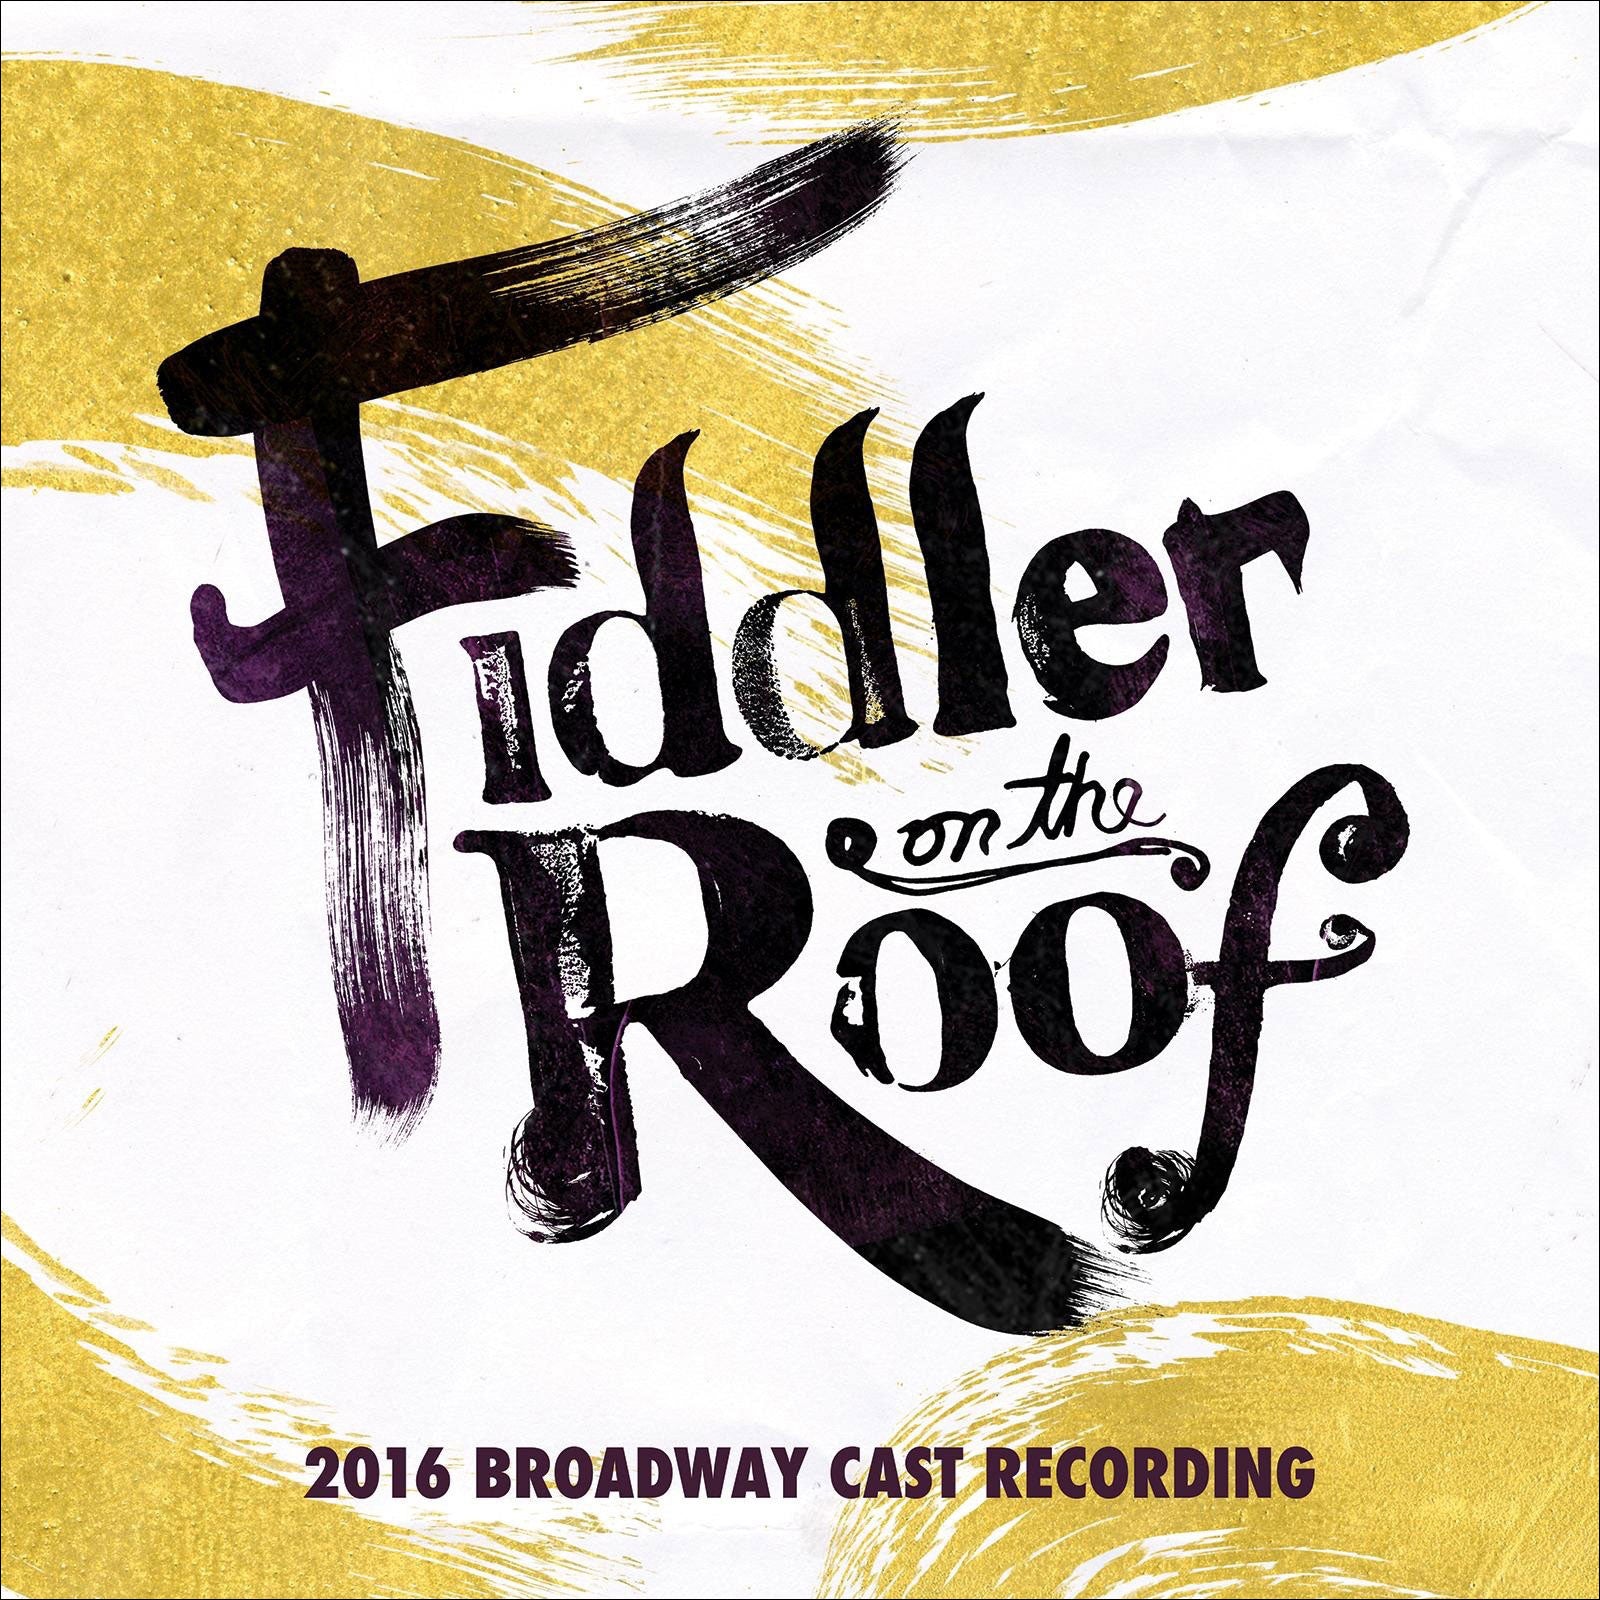 Fiddler on the Roof (2016 Broadway Cast Recording) [MP3]